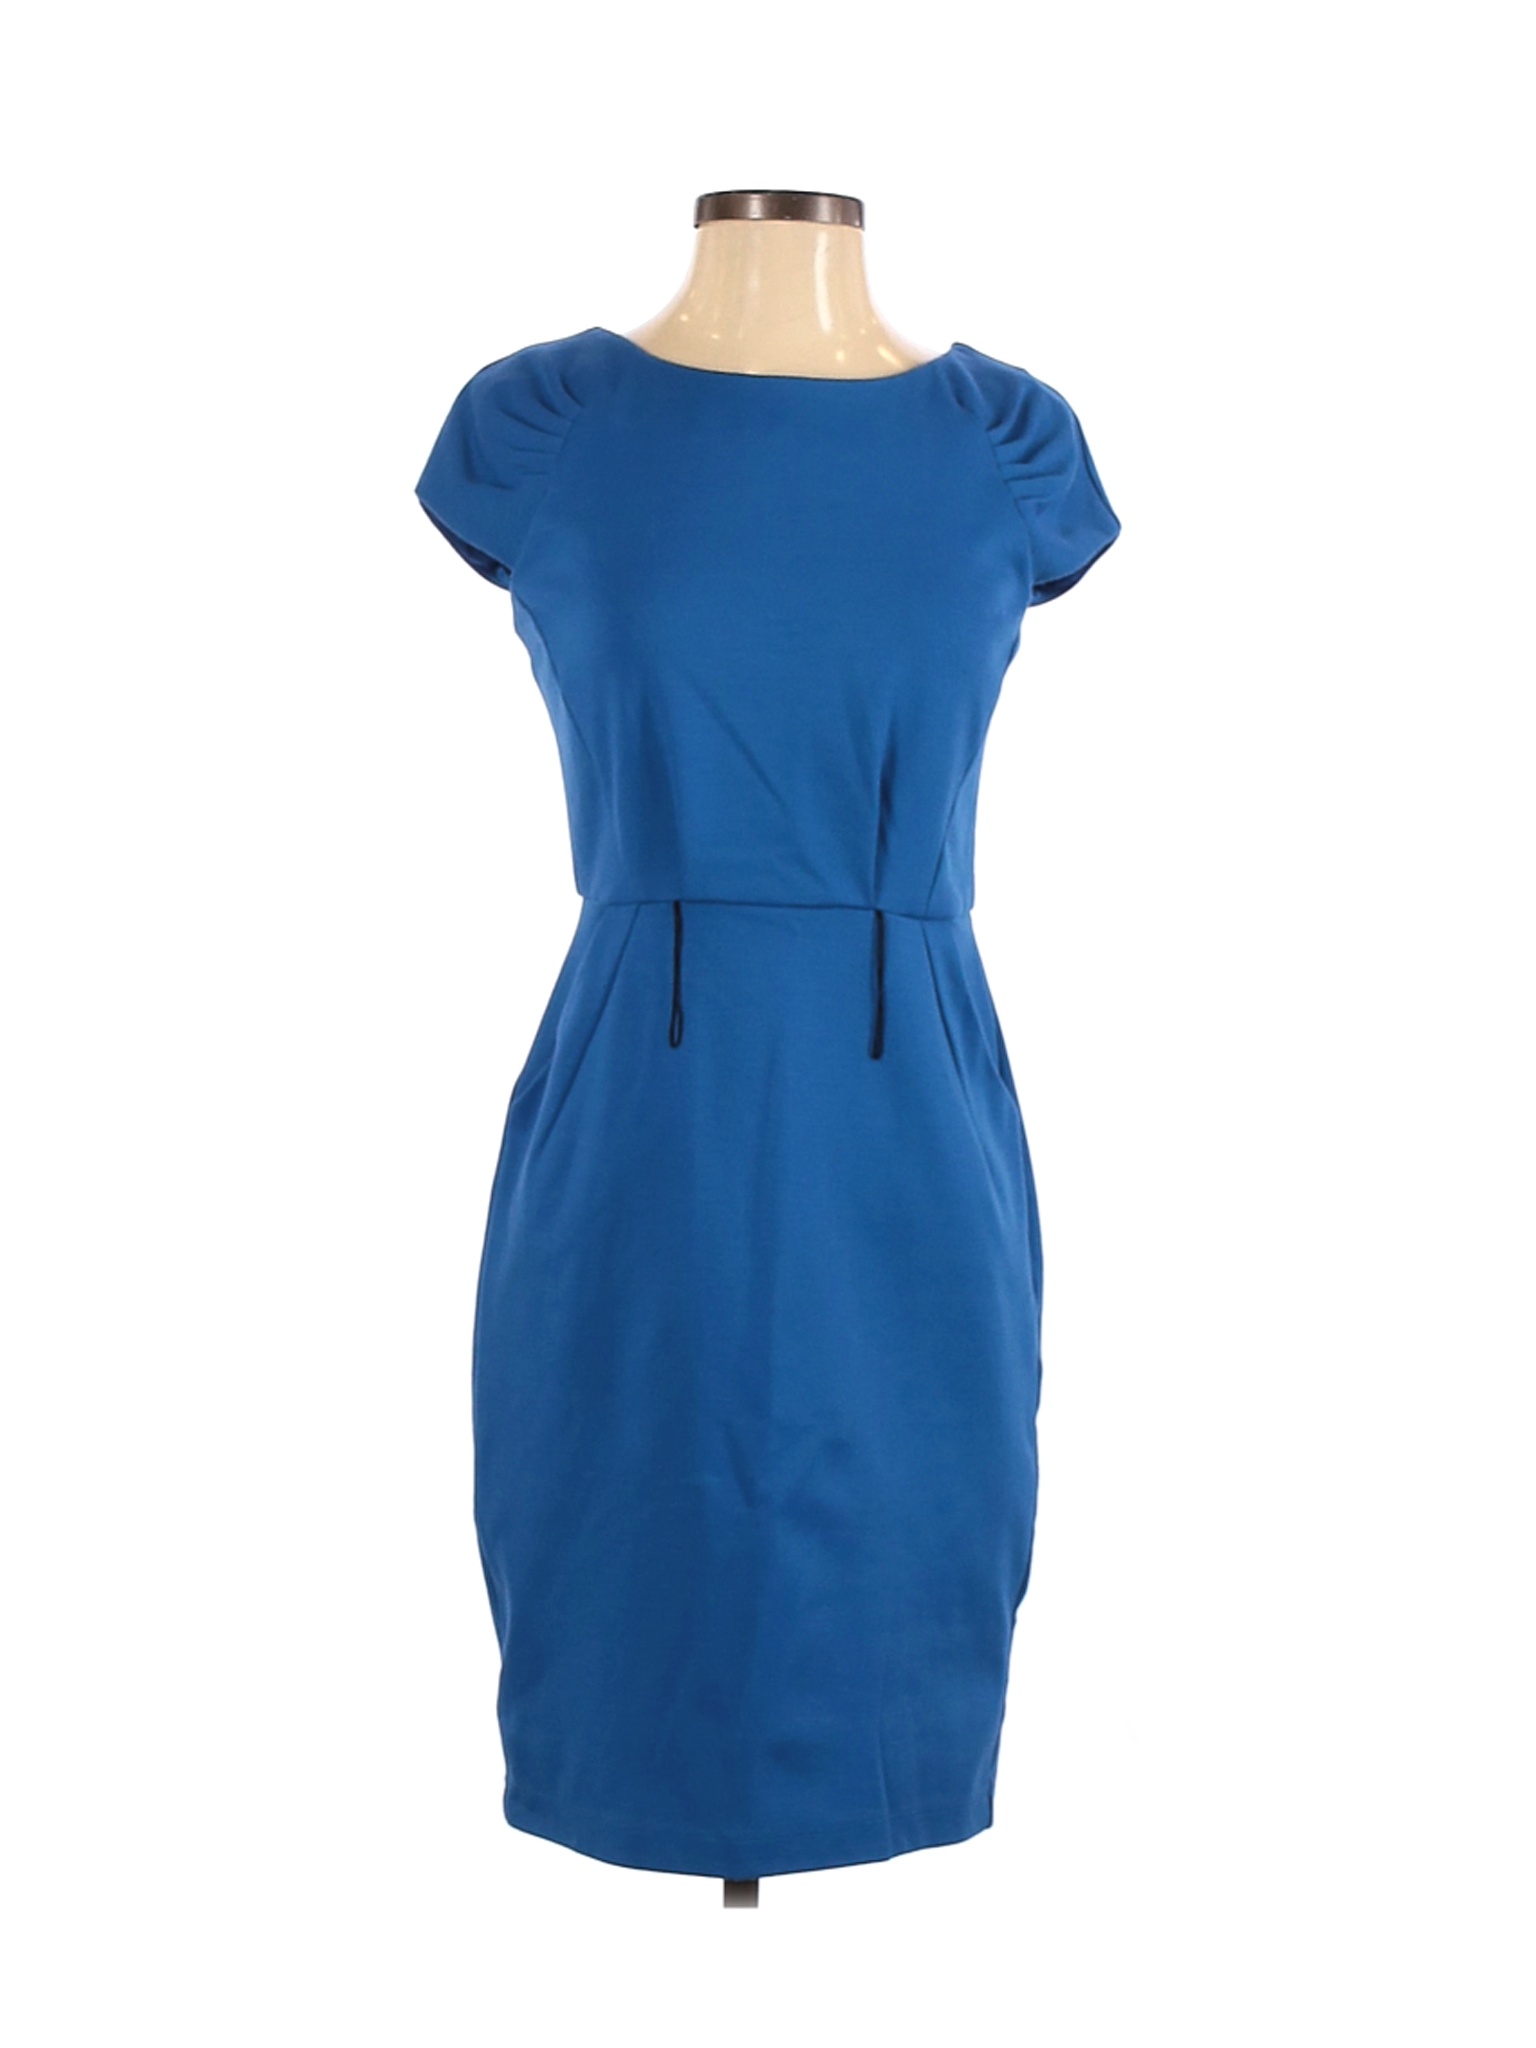 Max and Cleo Women Blue Casual Dress 4 | eBay